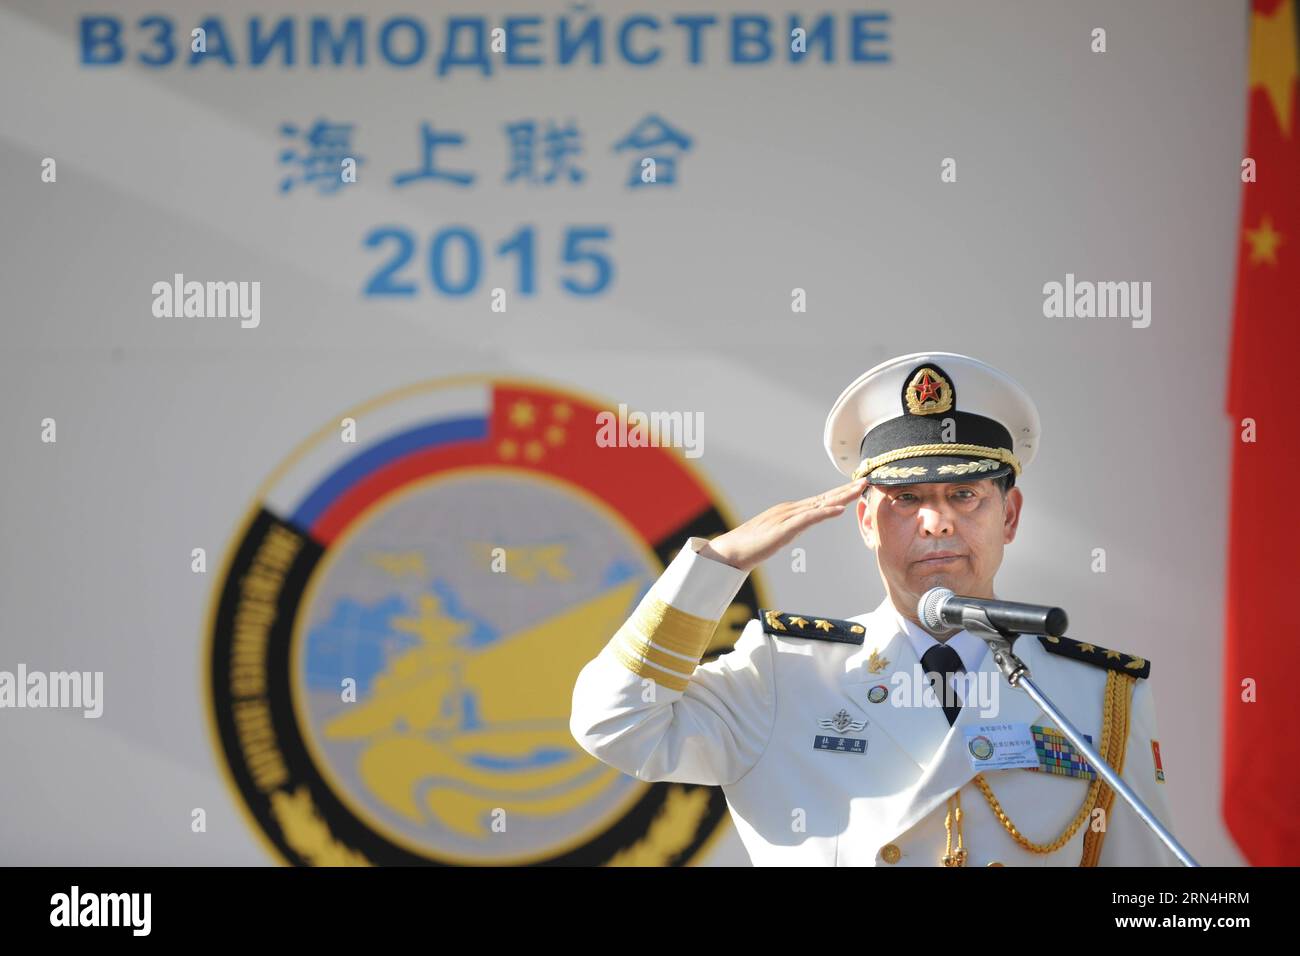 (150521) -- NOVOROSSIYSK, May 21, 2015 -- Du Jingchen, deputy commander of the Navy of the People s Liberation Army of China attends a closing ceremony in Novorossiysk, Russia, on May 21, 2015. Chinese and Russian naval forces on Thursday ended their joint military exercises in the Mediterranean, according to an online news briefing from the Chinese Defense Ministry. ) RUSSIA-NOVOROSSIYSK-CHINA-JOINT NAVAL EXERCISES DaixTianfang PUBLICATIONxNOTxINxCHN   150521 Novorossiysk May 21 2015 you Jingchen Deputy Commander of The Navy of The Celebrities S Liberation Army of China Attends a CLOSING Cere Stock Photo